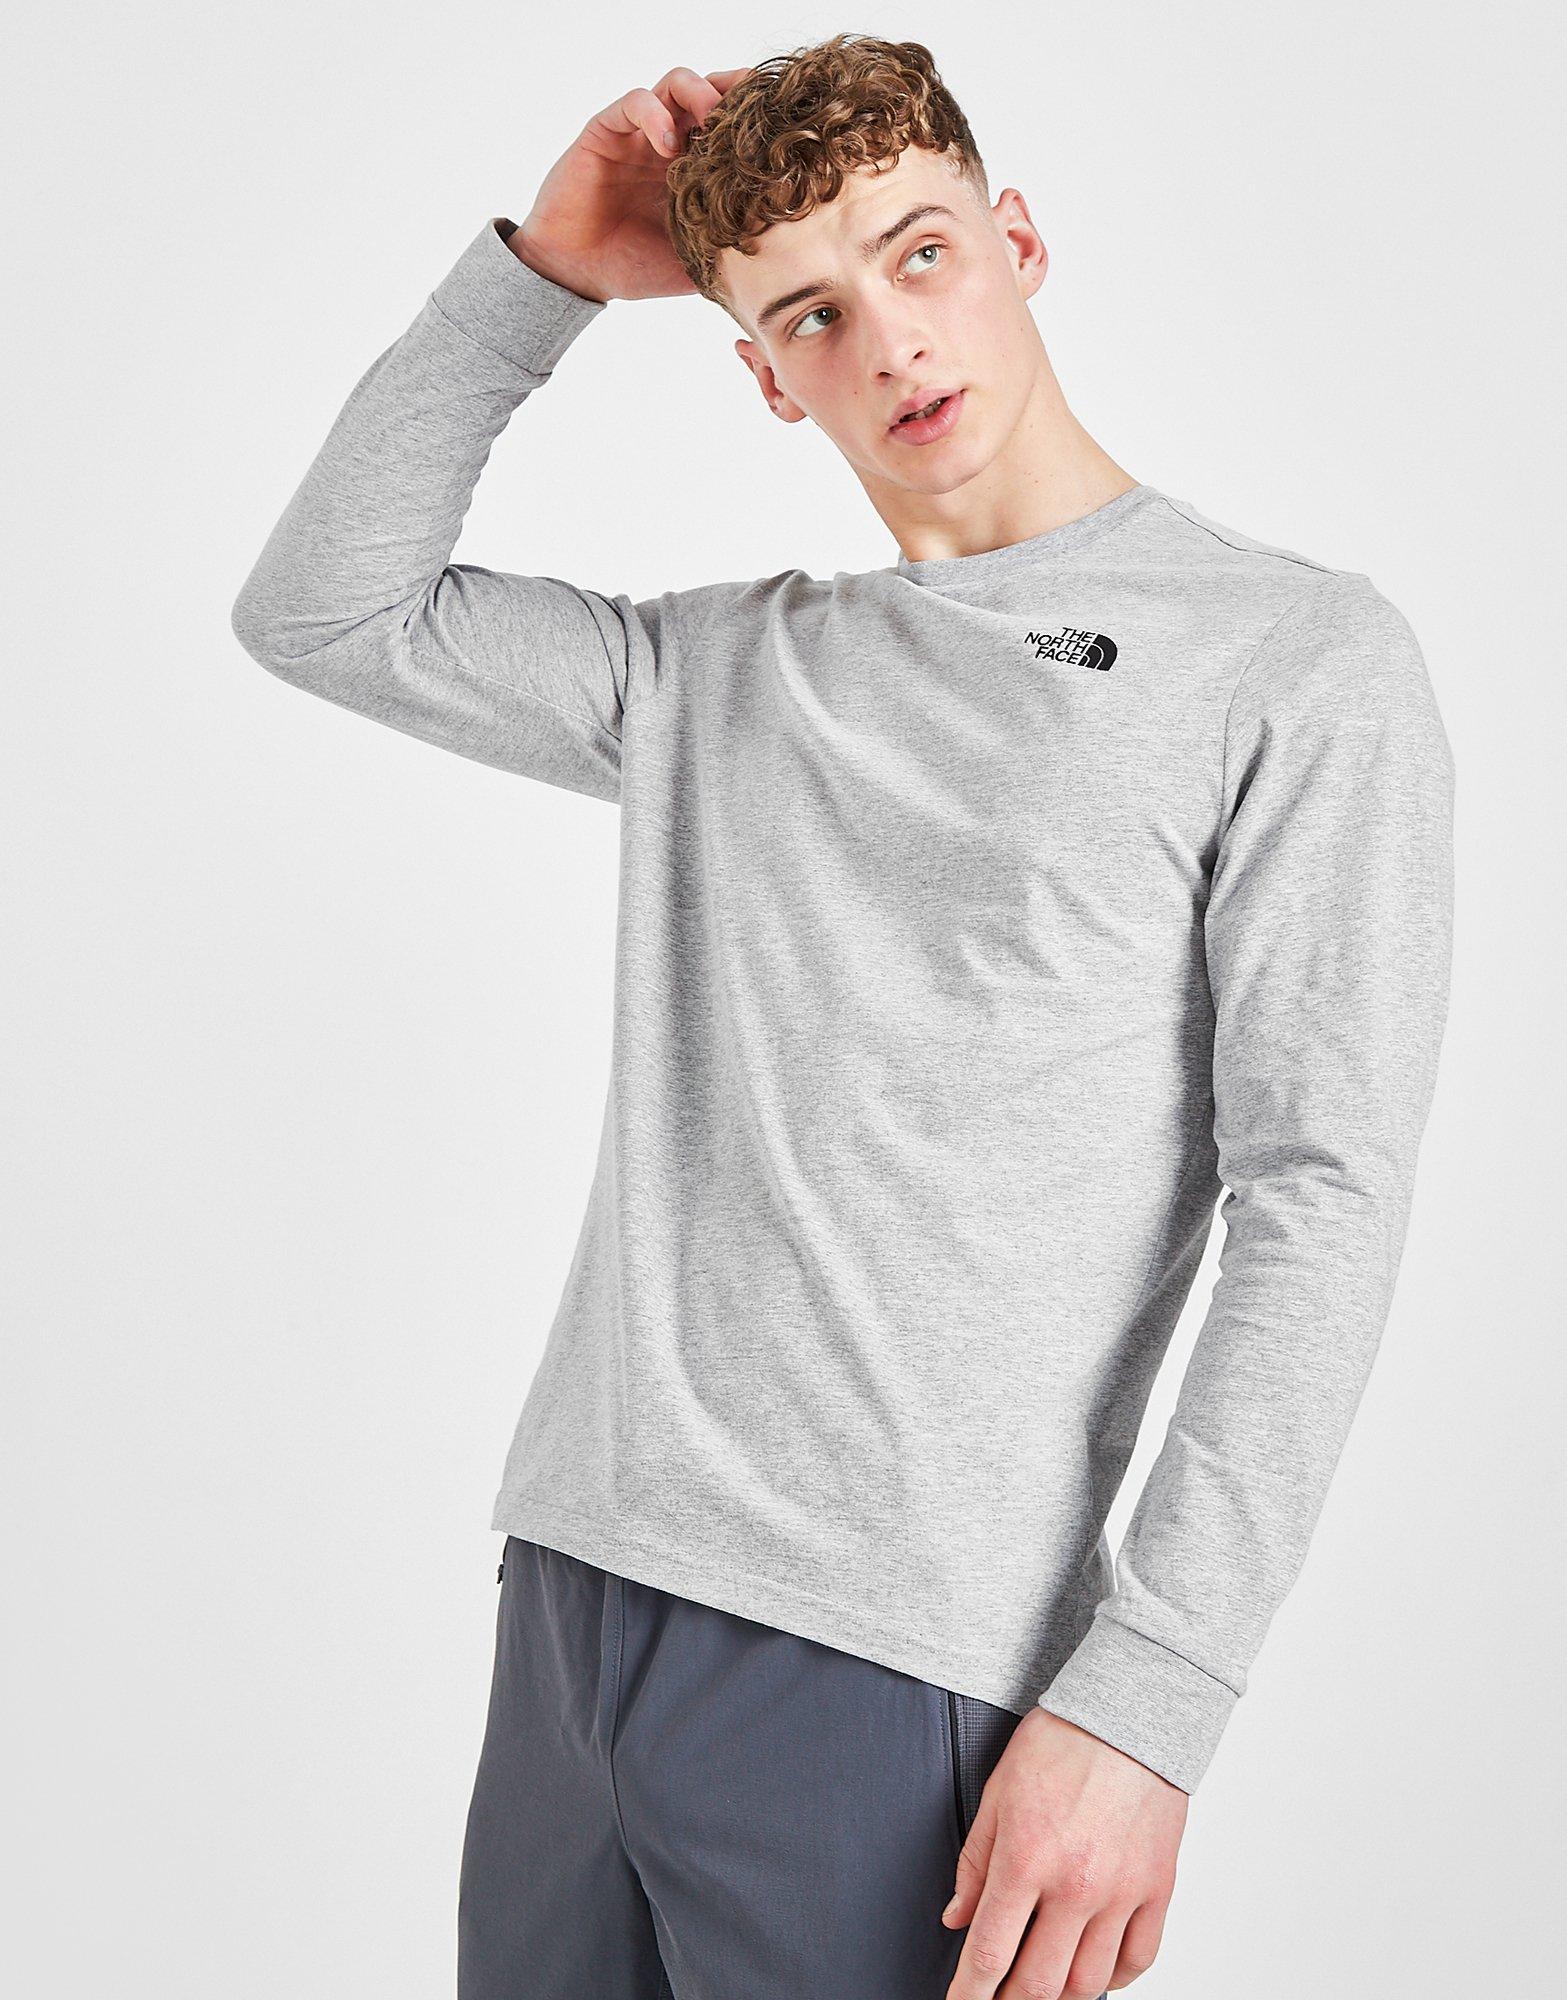 North Face Simple Dome Long Sleeve T-Shirt